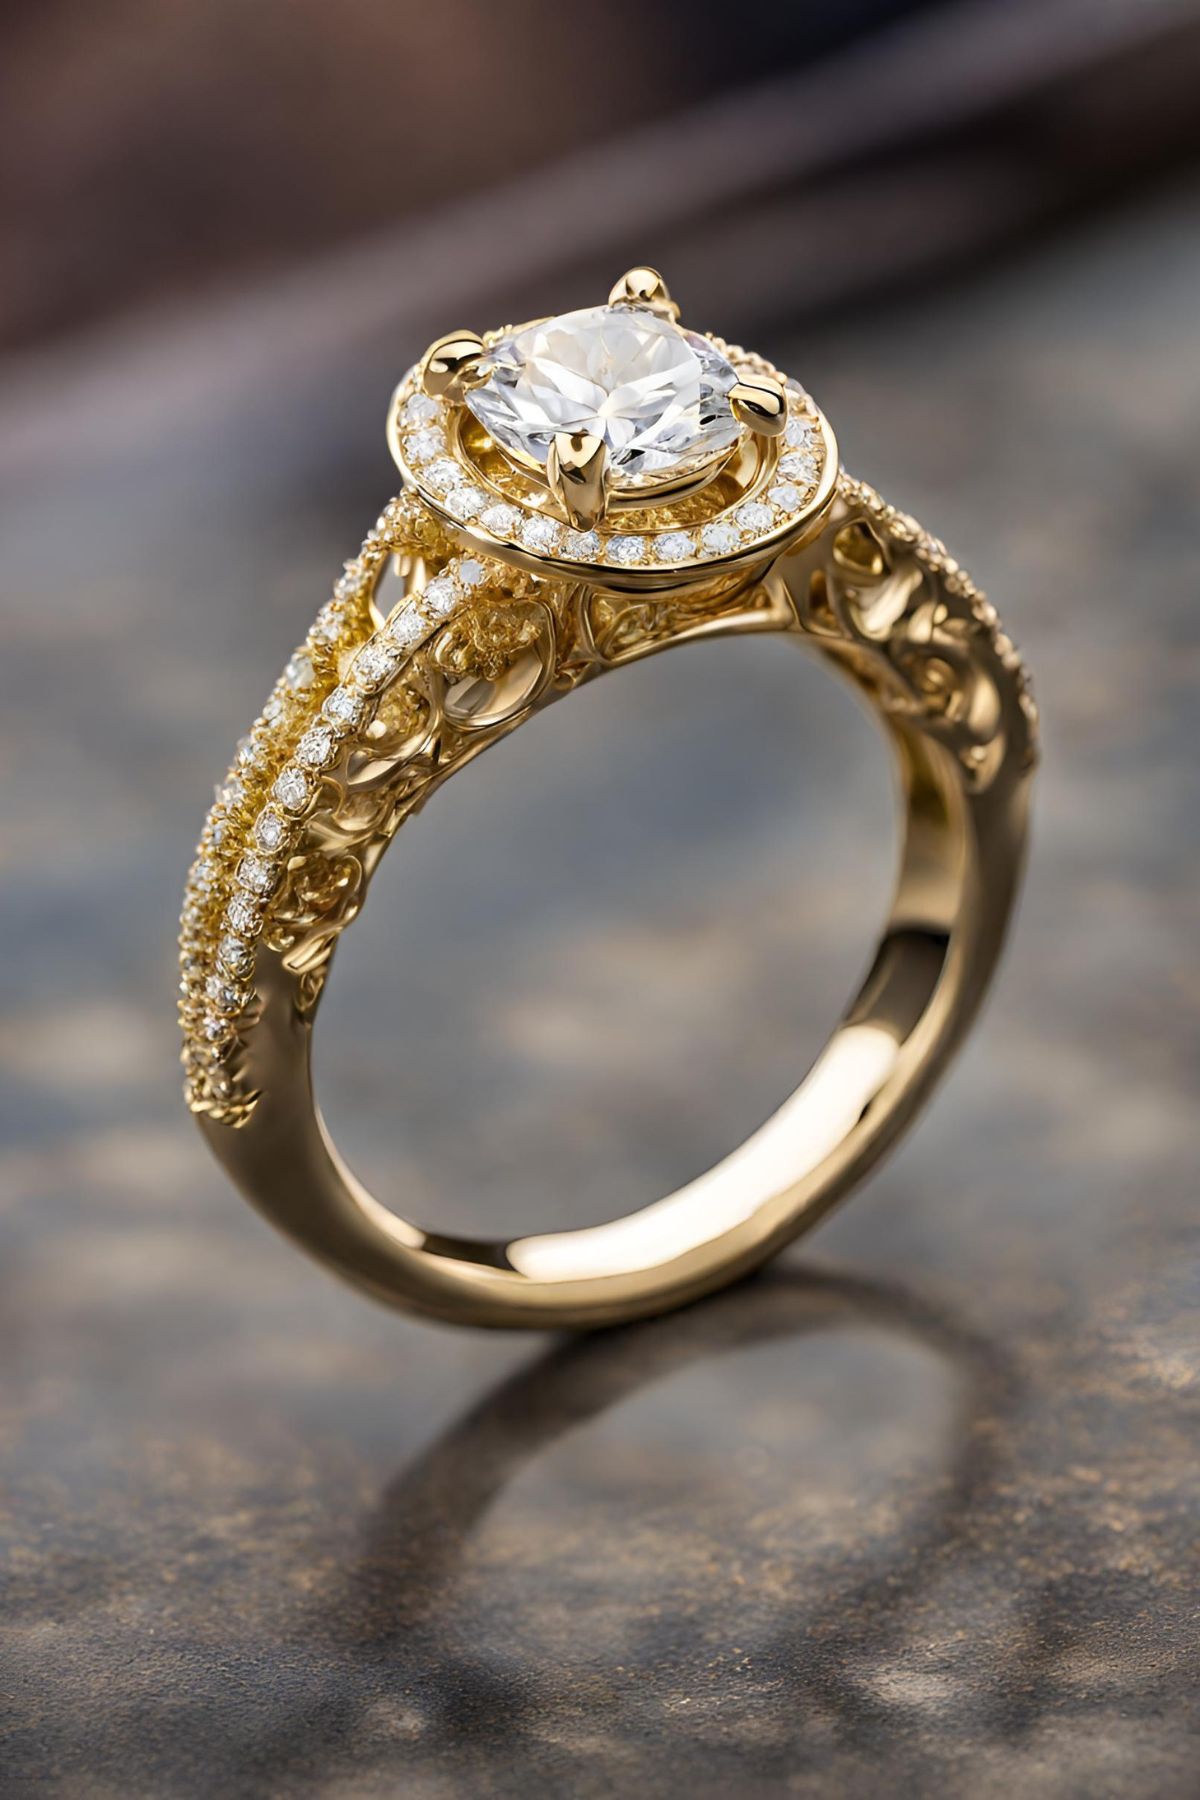 31 Unique Yellow Gold Engagement Rings - Jewelry Material Guide